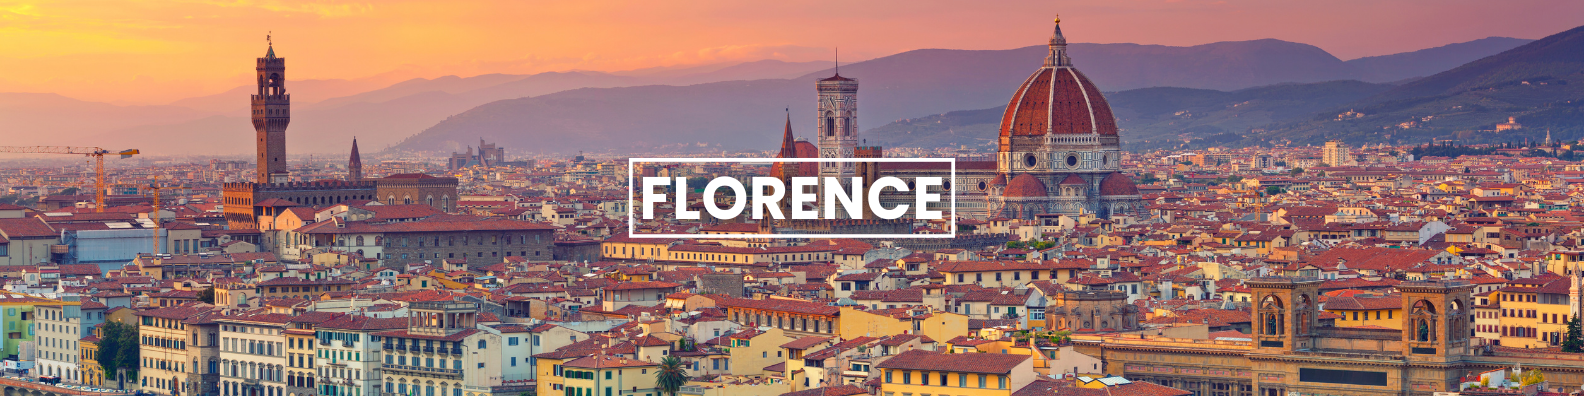 an aerial view of the city of florence at sunset . Barter's Travelnet 